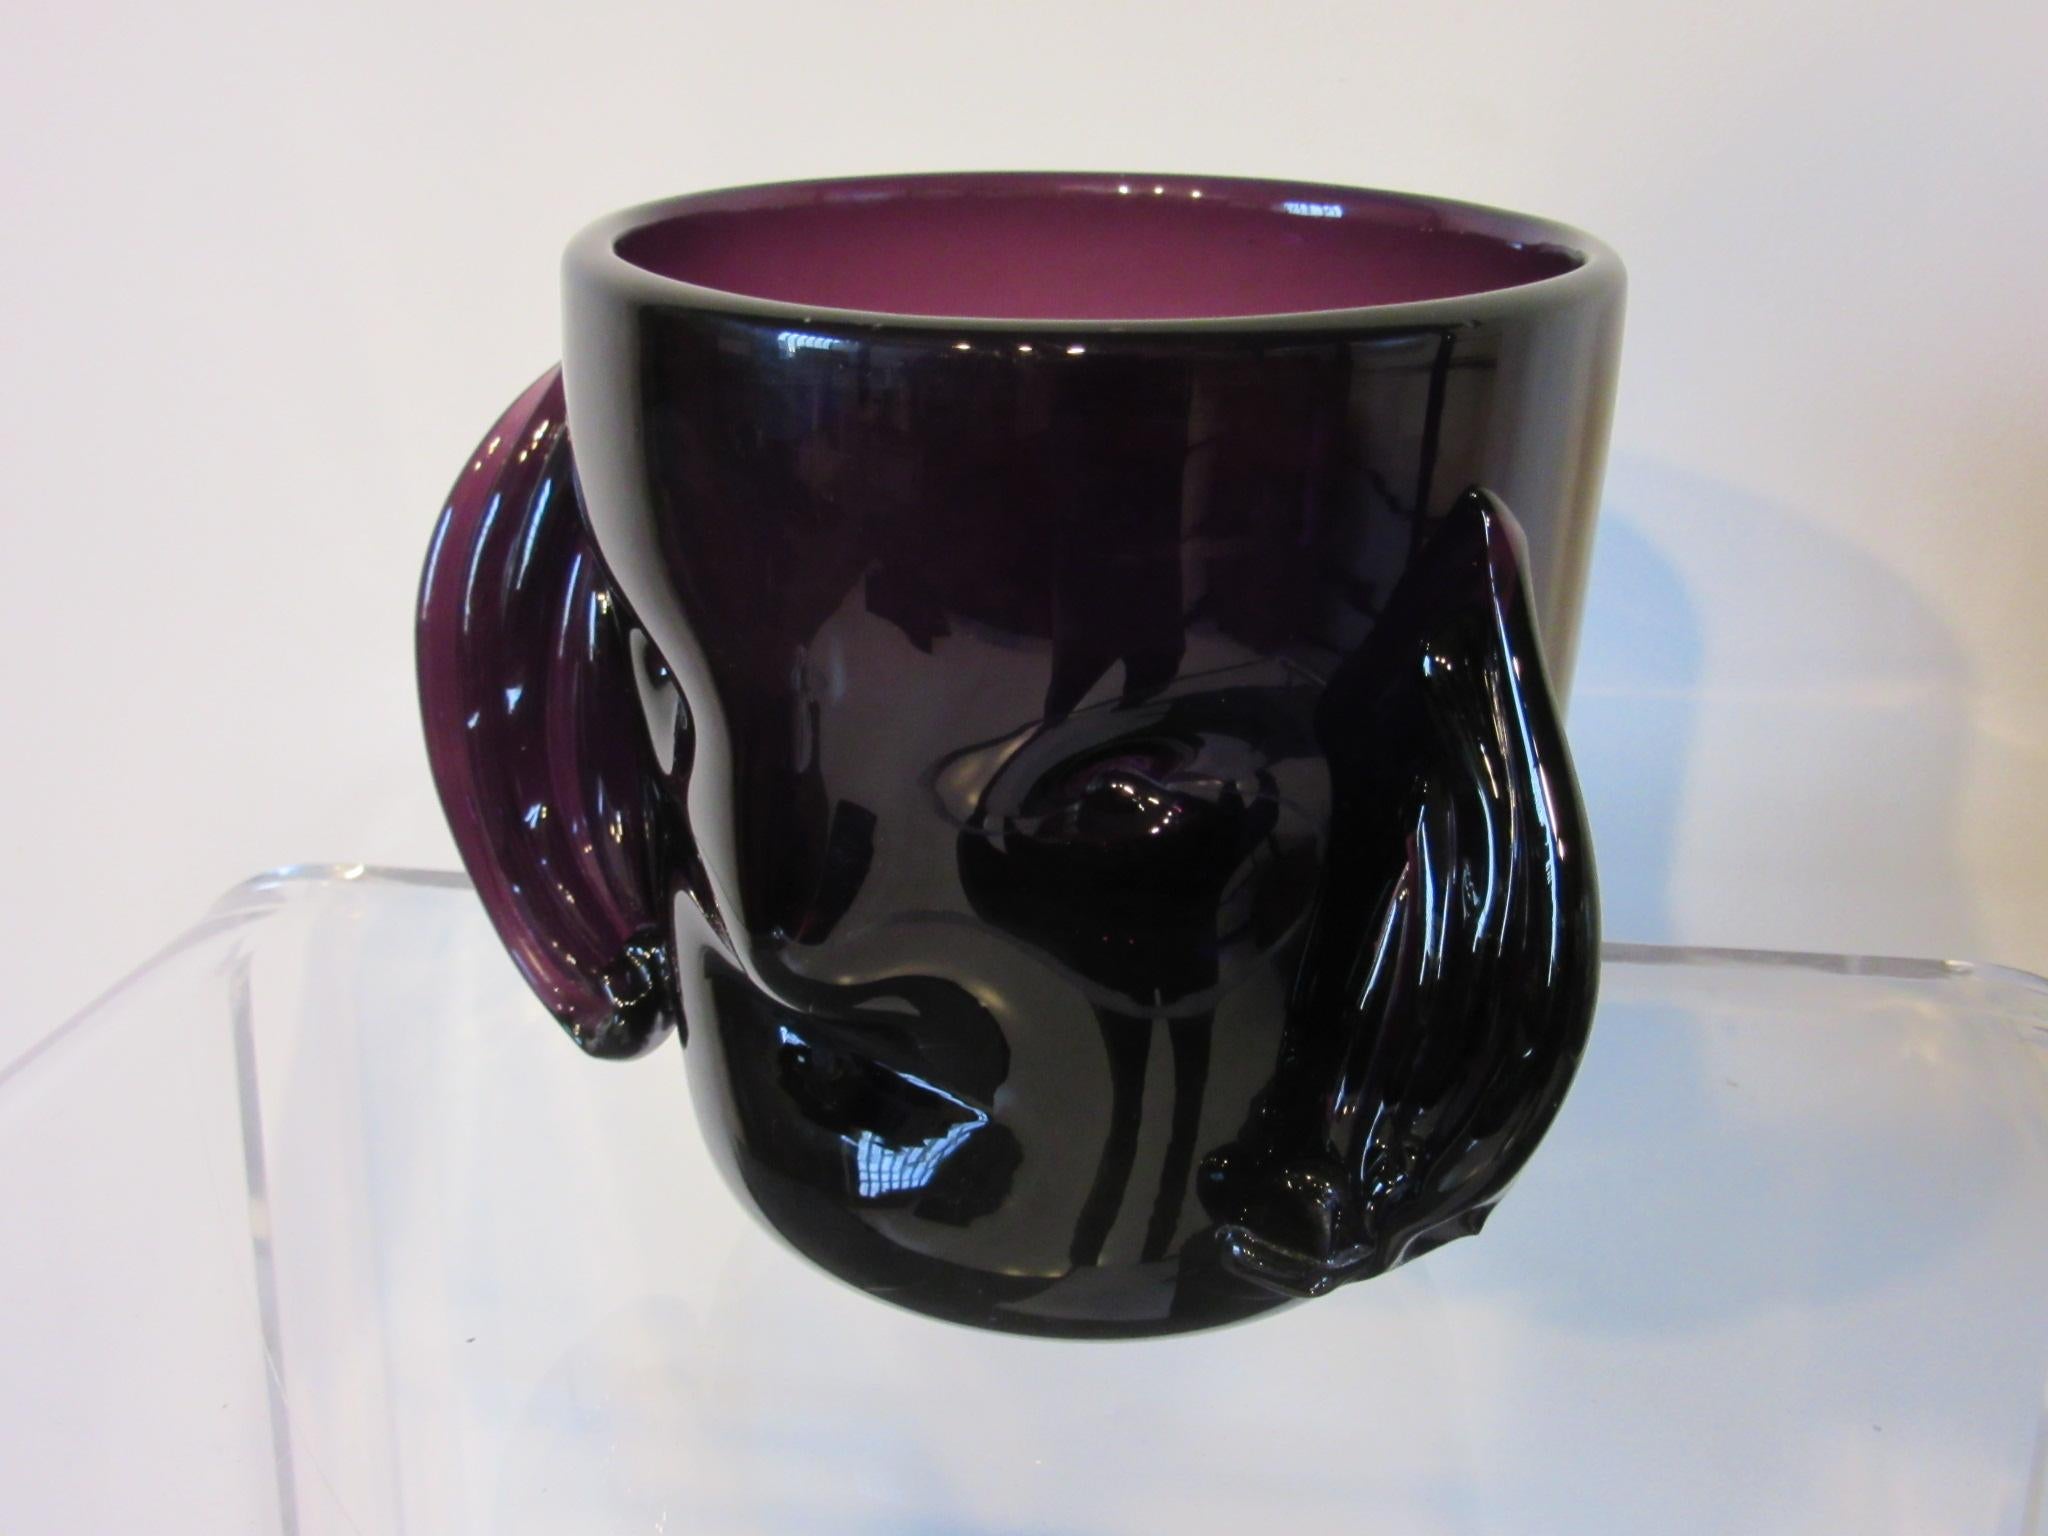 A amethyst colored hand blown glass head vase with a stylized face and hair attributed to Hank Adams and the Blenko glass company. This piece was purchased from the estate of a Blenko glass collector who had a large and the most rarest Blenko pieces.